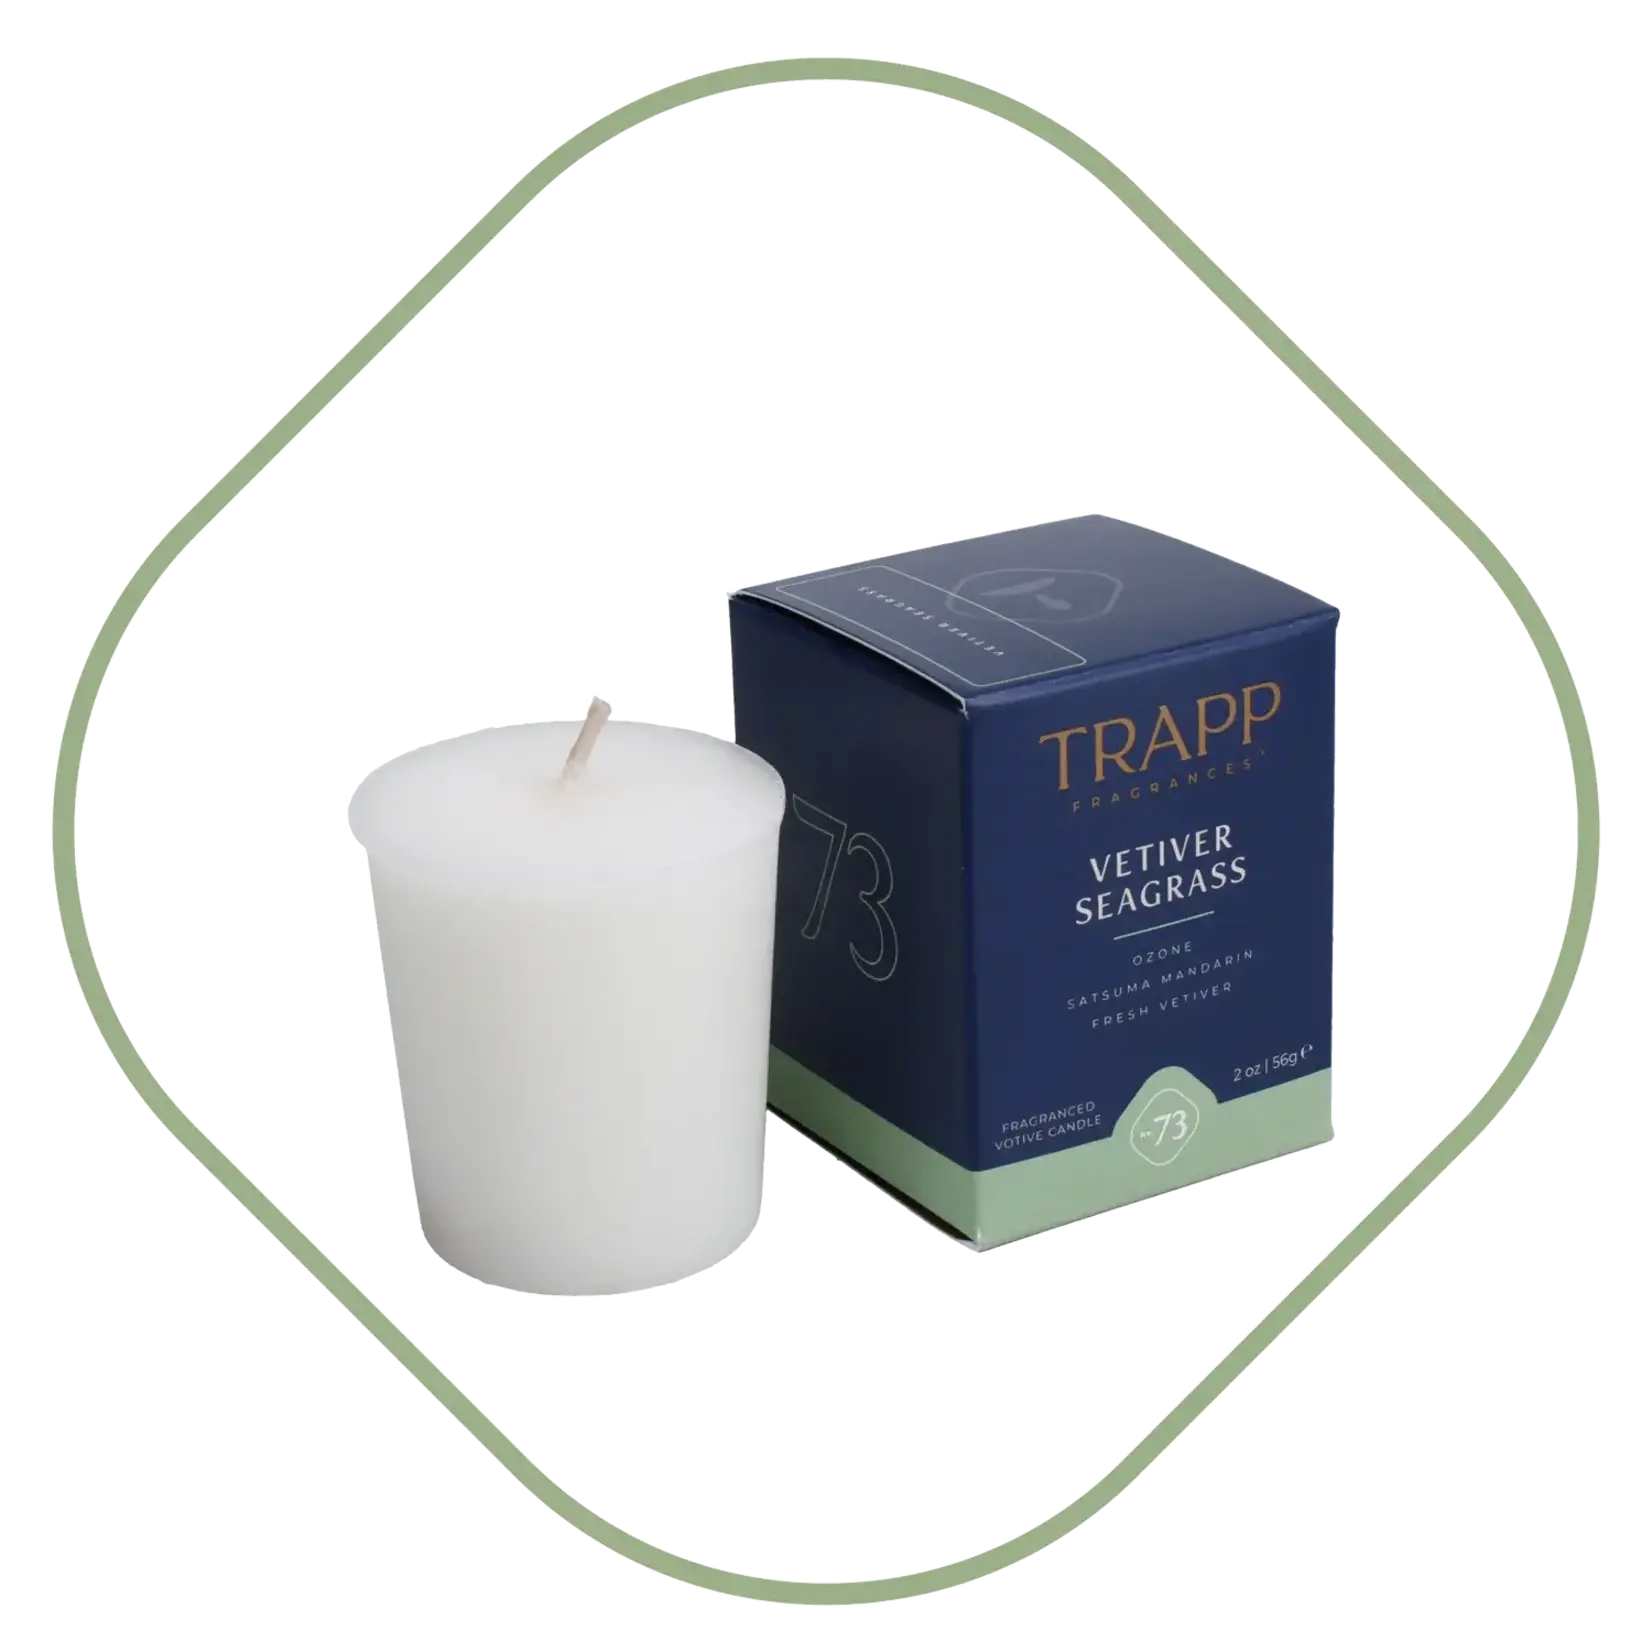 Trapp Candles No. 73 Vetiver Seagrass 2 oz. Votive Candle